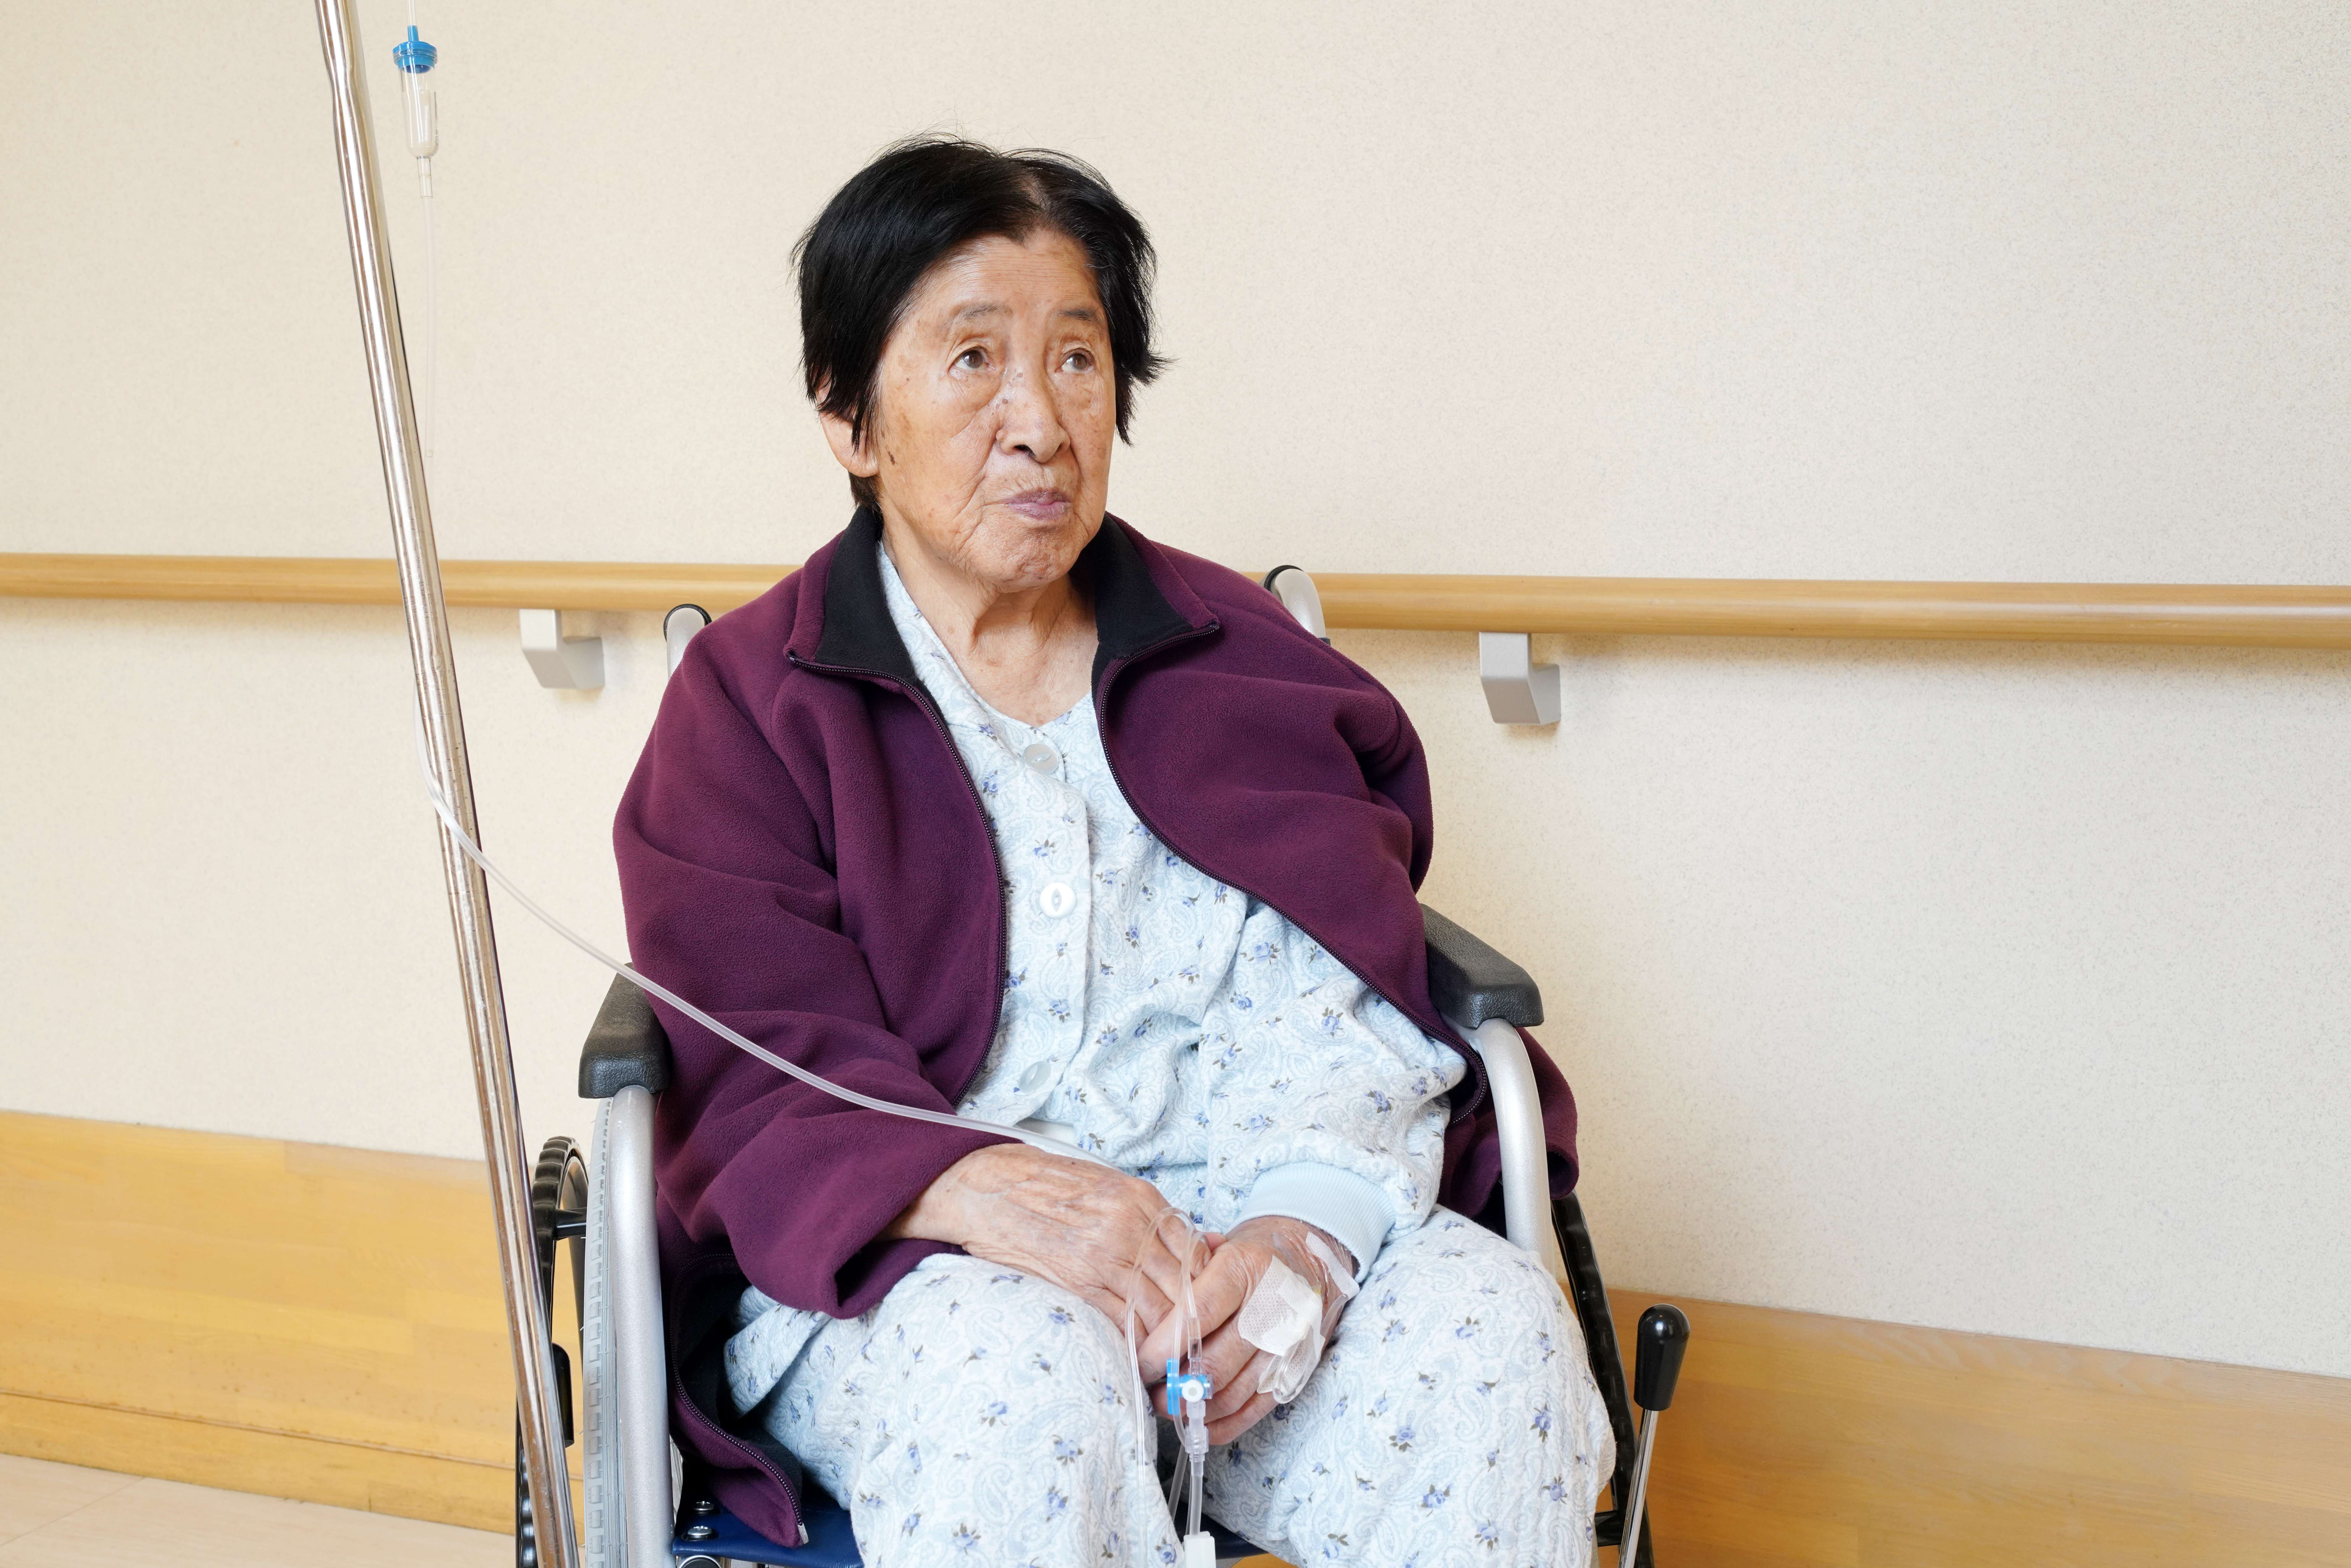 How Can I Report Nursing Home Abuse